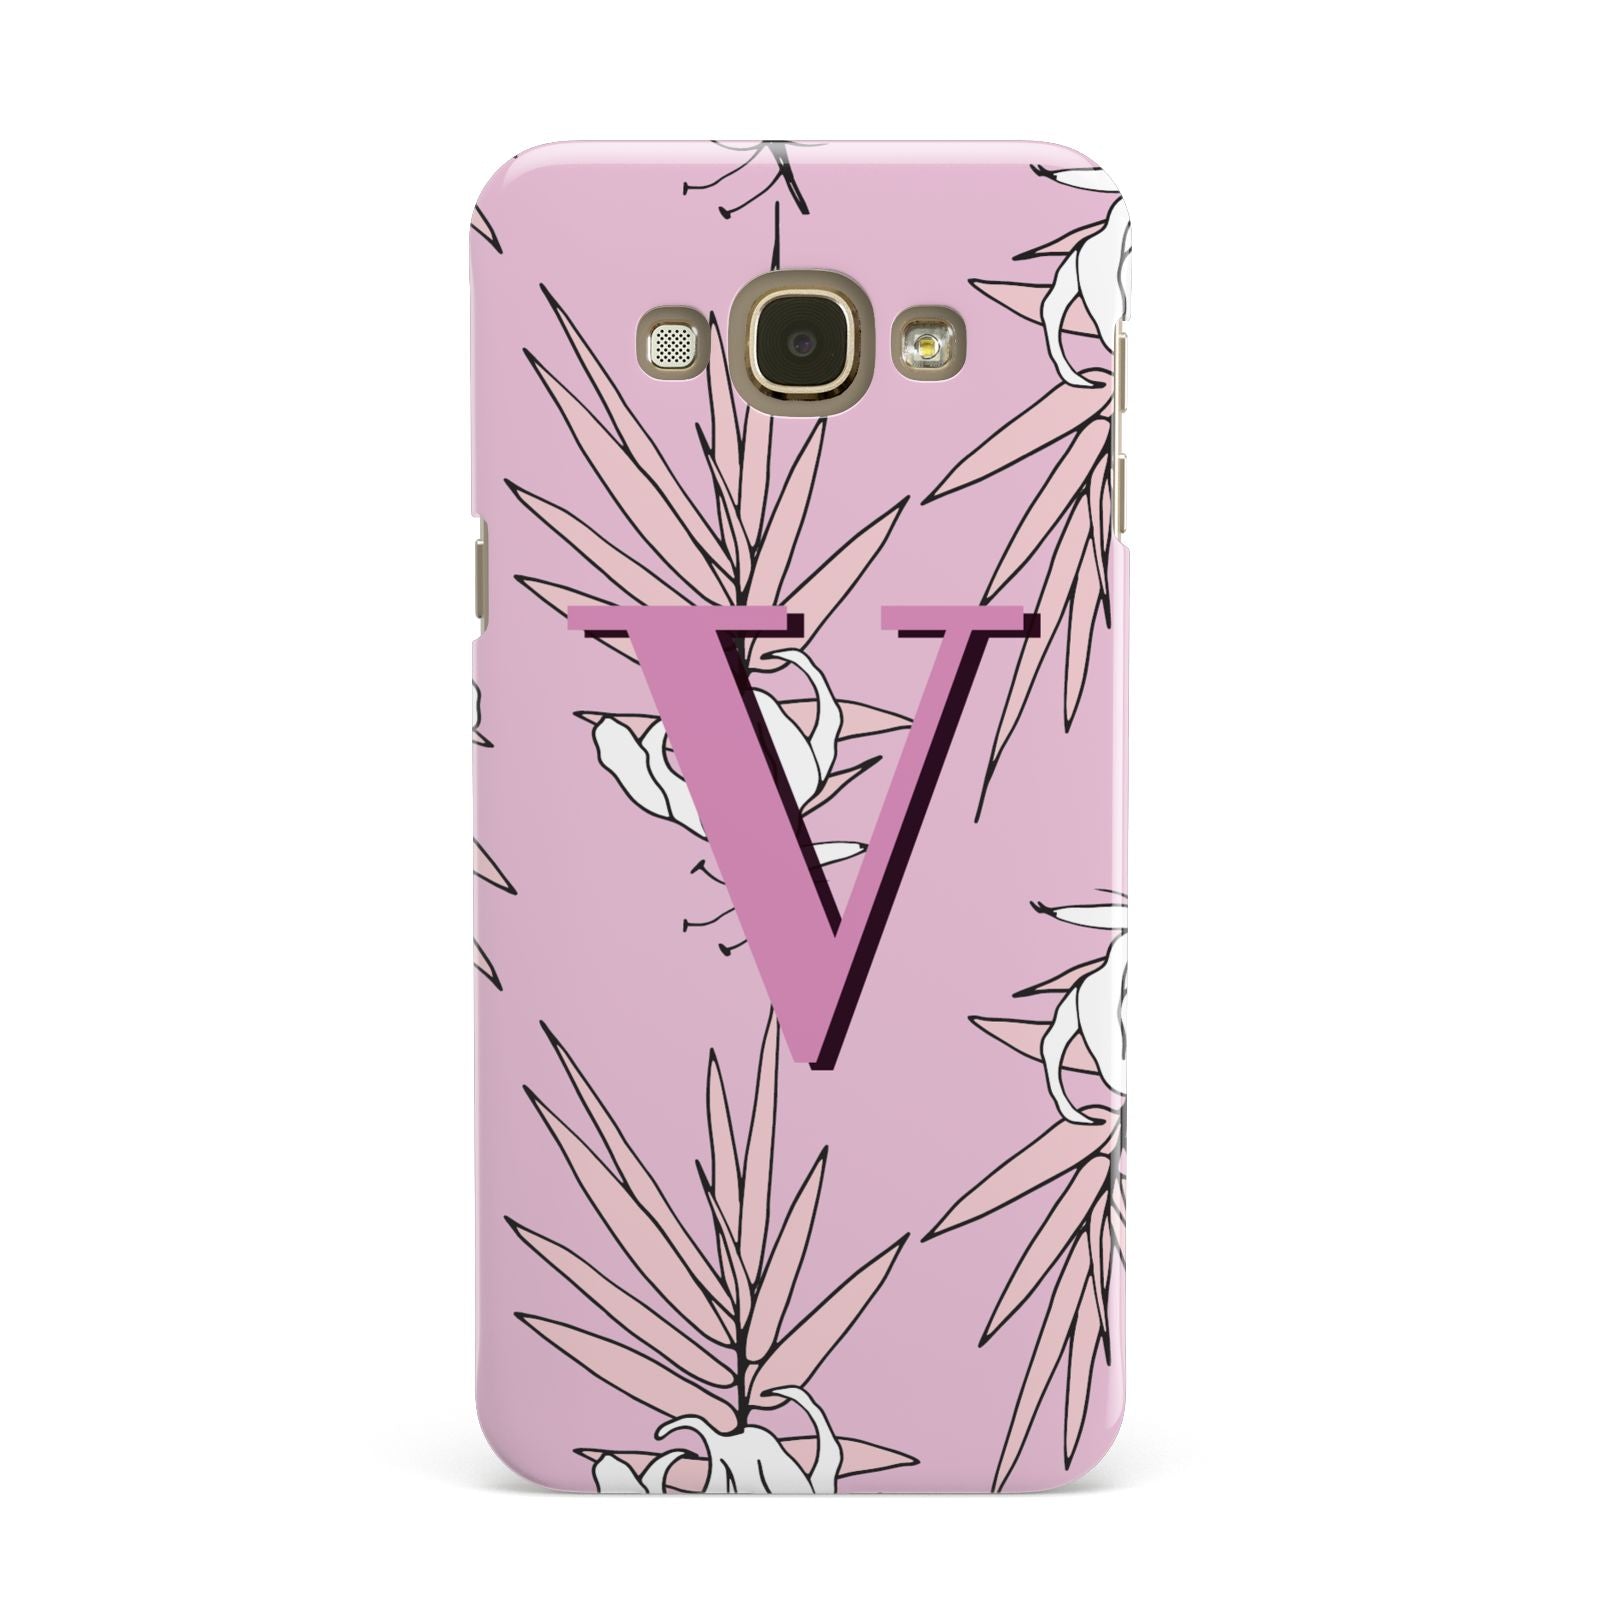 Personalised Pink and White Floral Monogram Samsung Galaxy A8 Case